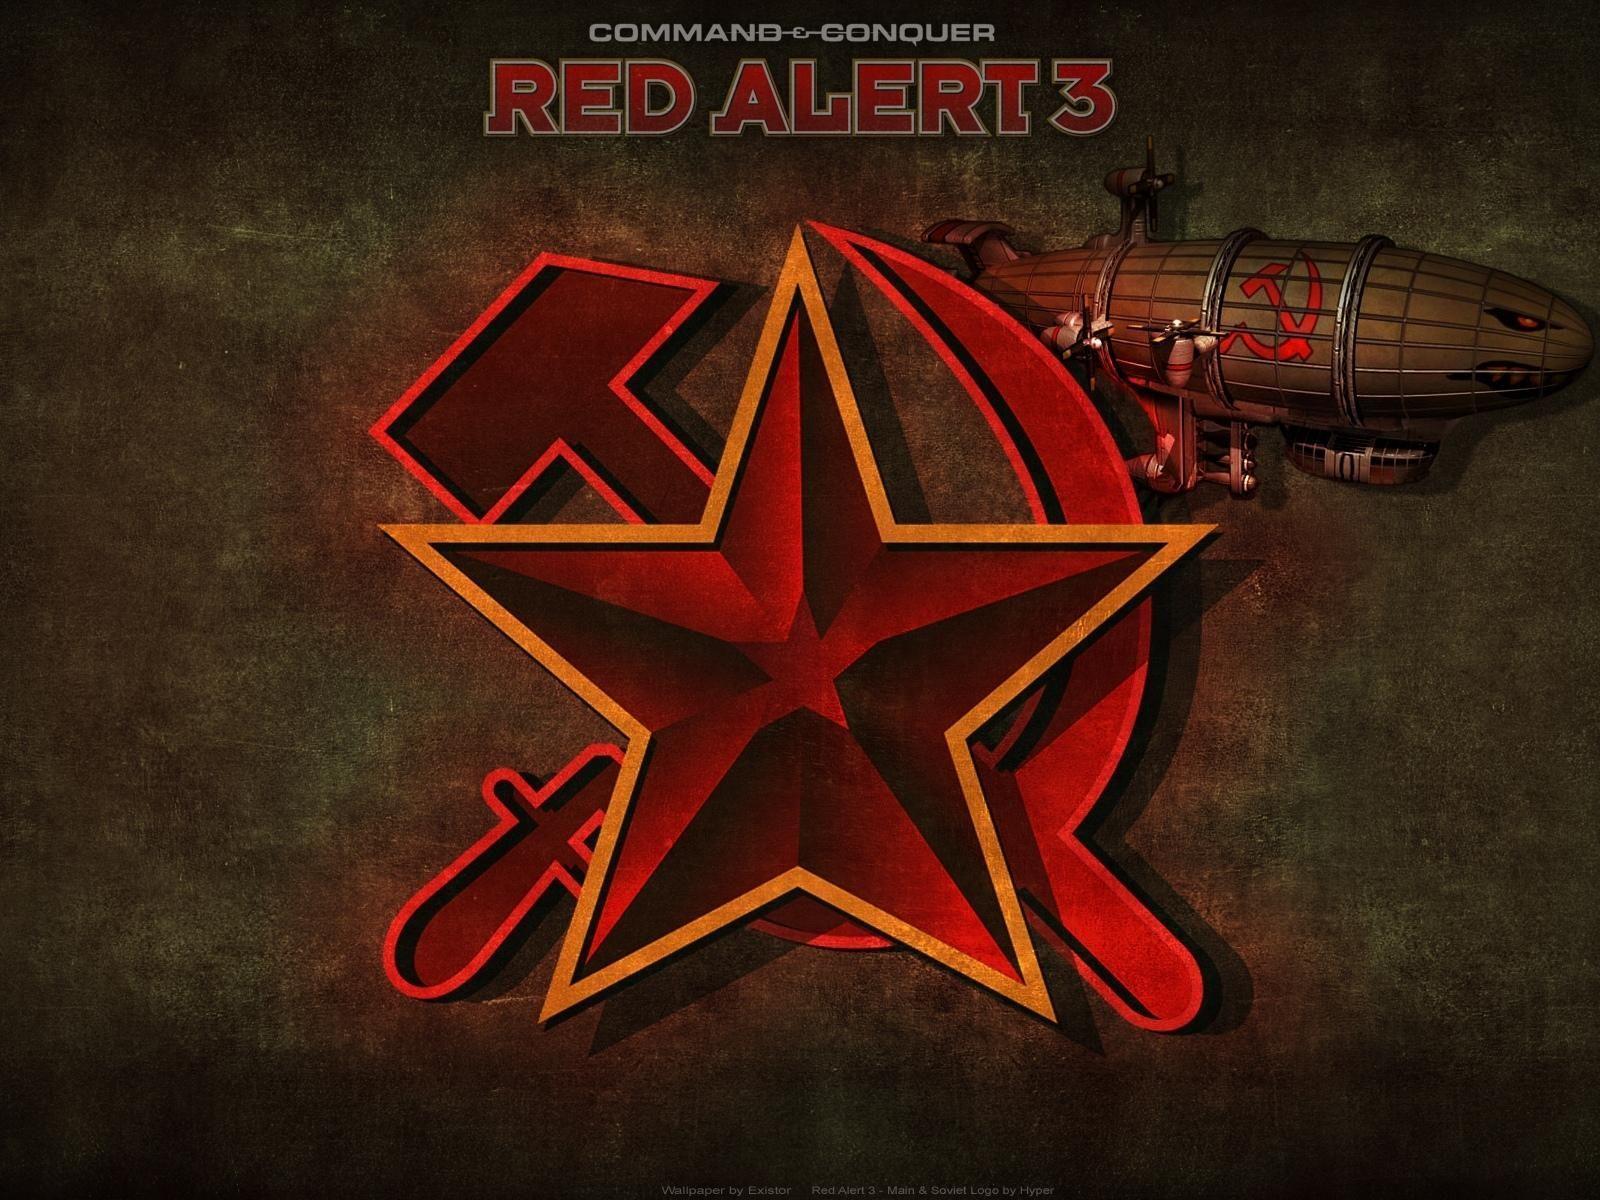 Command & Conquer Red Alert 3 wallpaper picture download